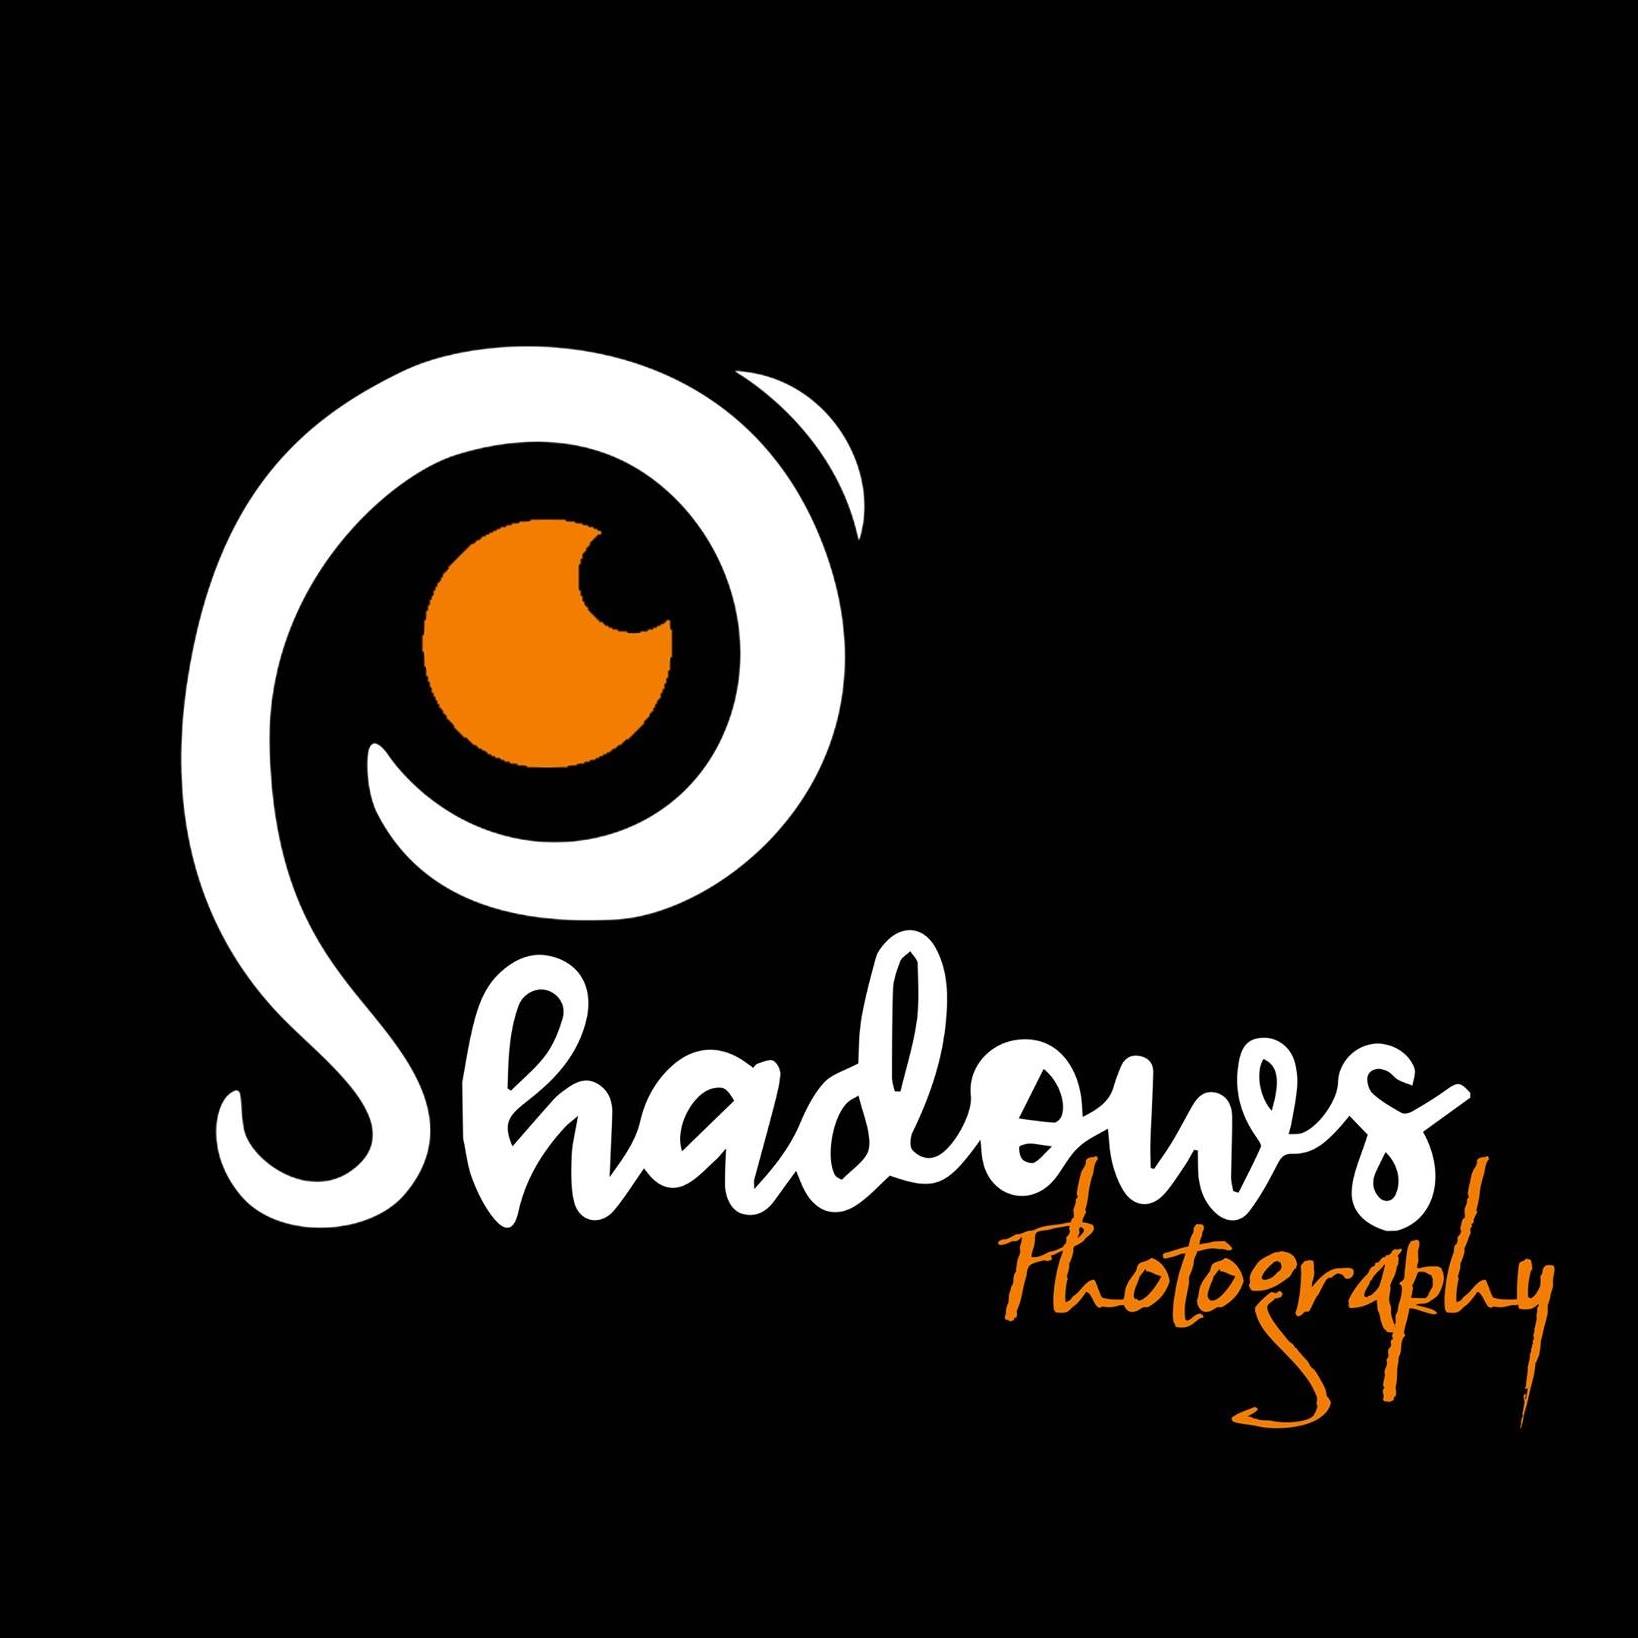 Shadows Photography|Photographer|Event Services